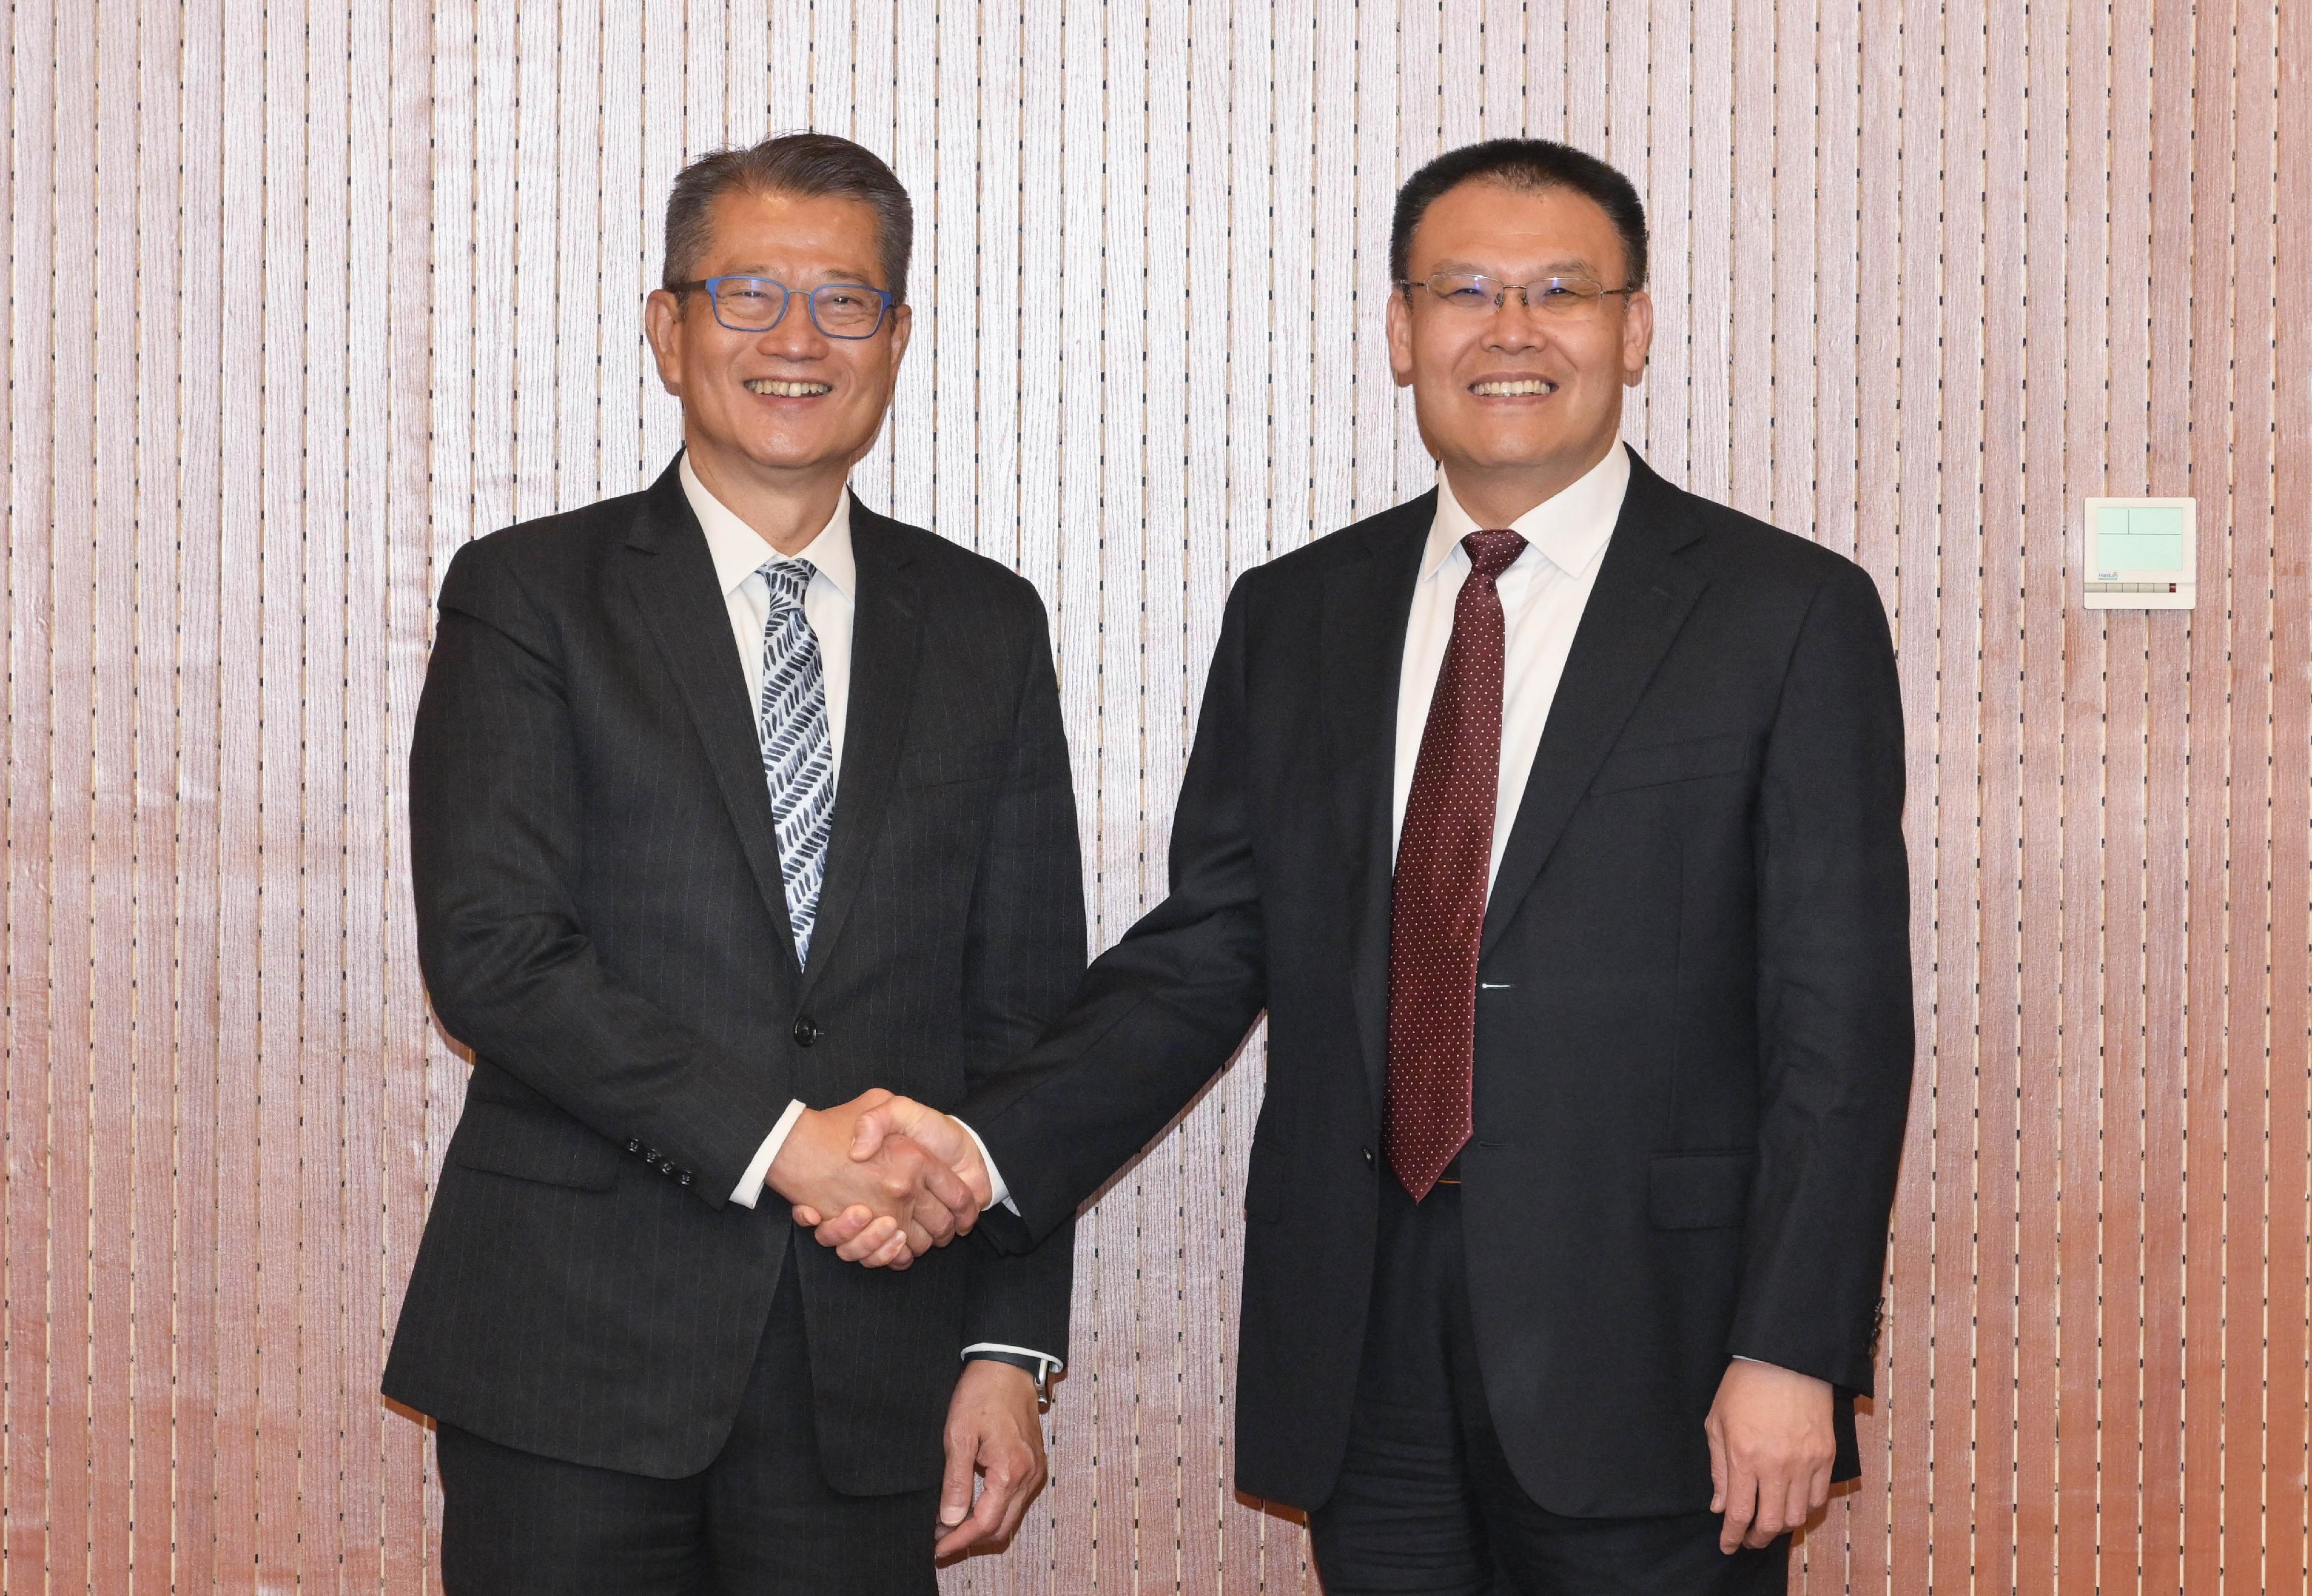 The Financial Secretary, Mr Paul Chan, continued his visit in Beijing today (April 20). Mr Chan (left) visits the Ministry of Finance and meets with Vice Minister of Finance Mr Wang Dongwei (right).